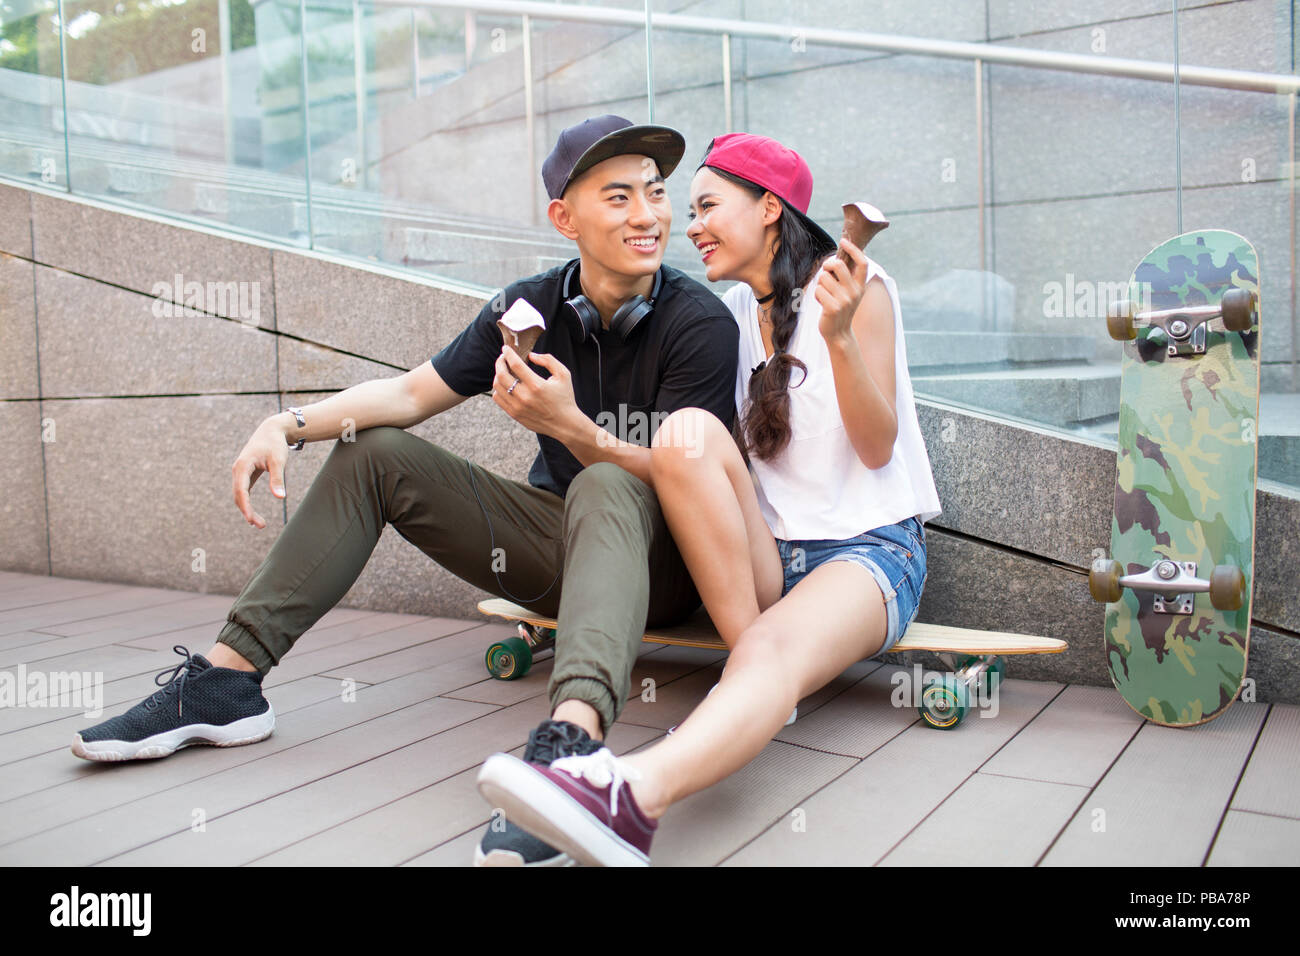 Cheerful young Chinese couple eating ice cream on skateboard Stock